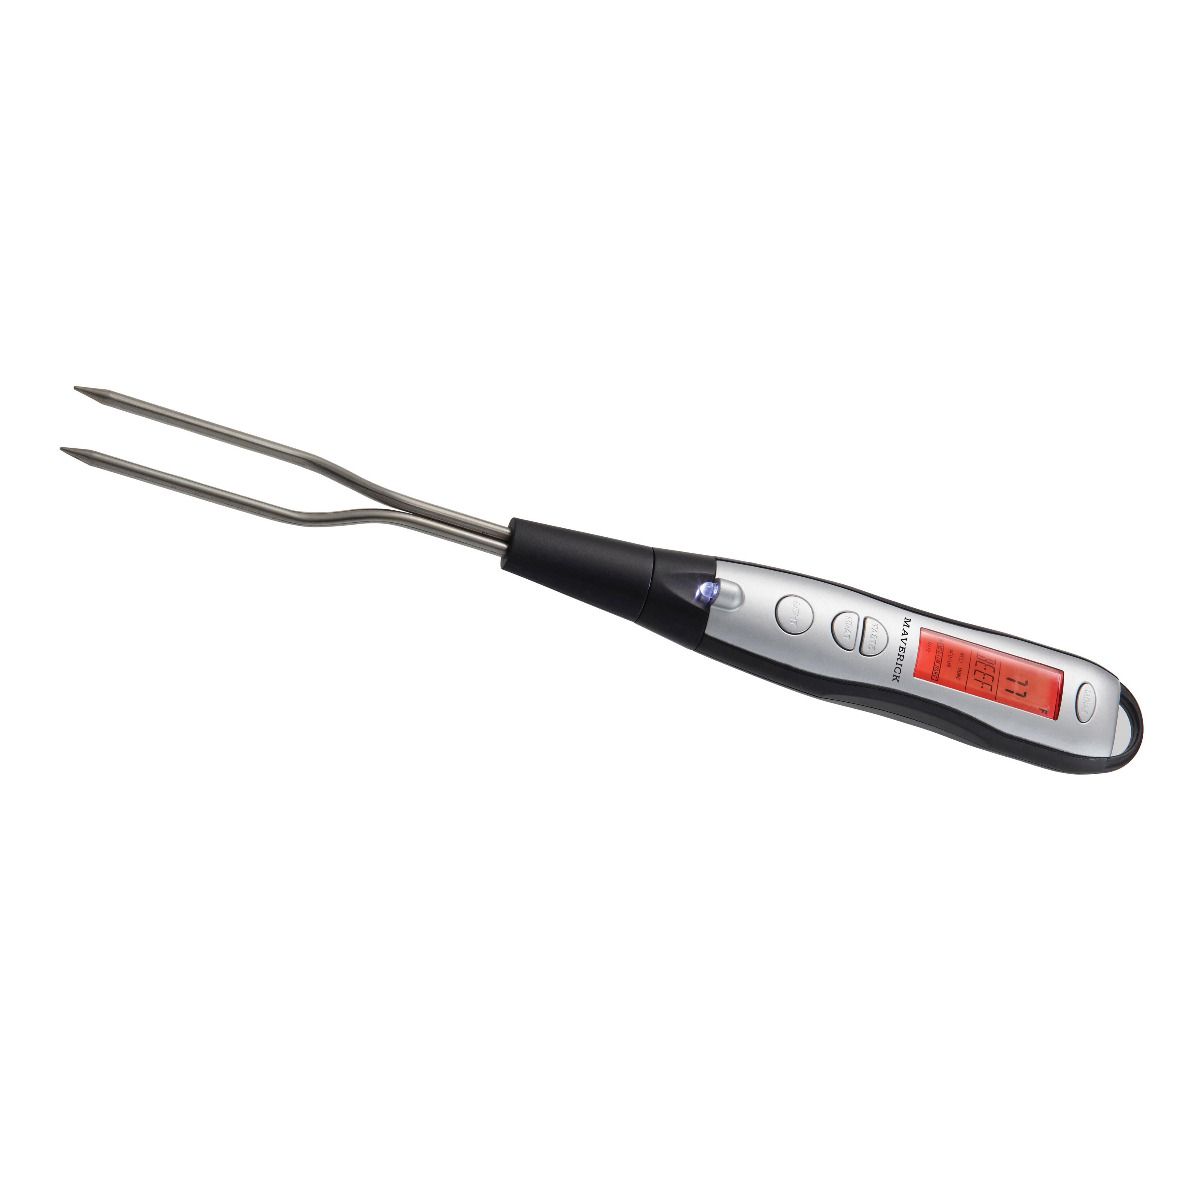 BBQ MEAT FORK DIGITAL THERMOMETER WITH LIGHT BLACK/SILVER